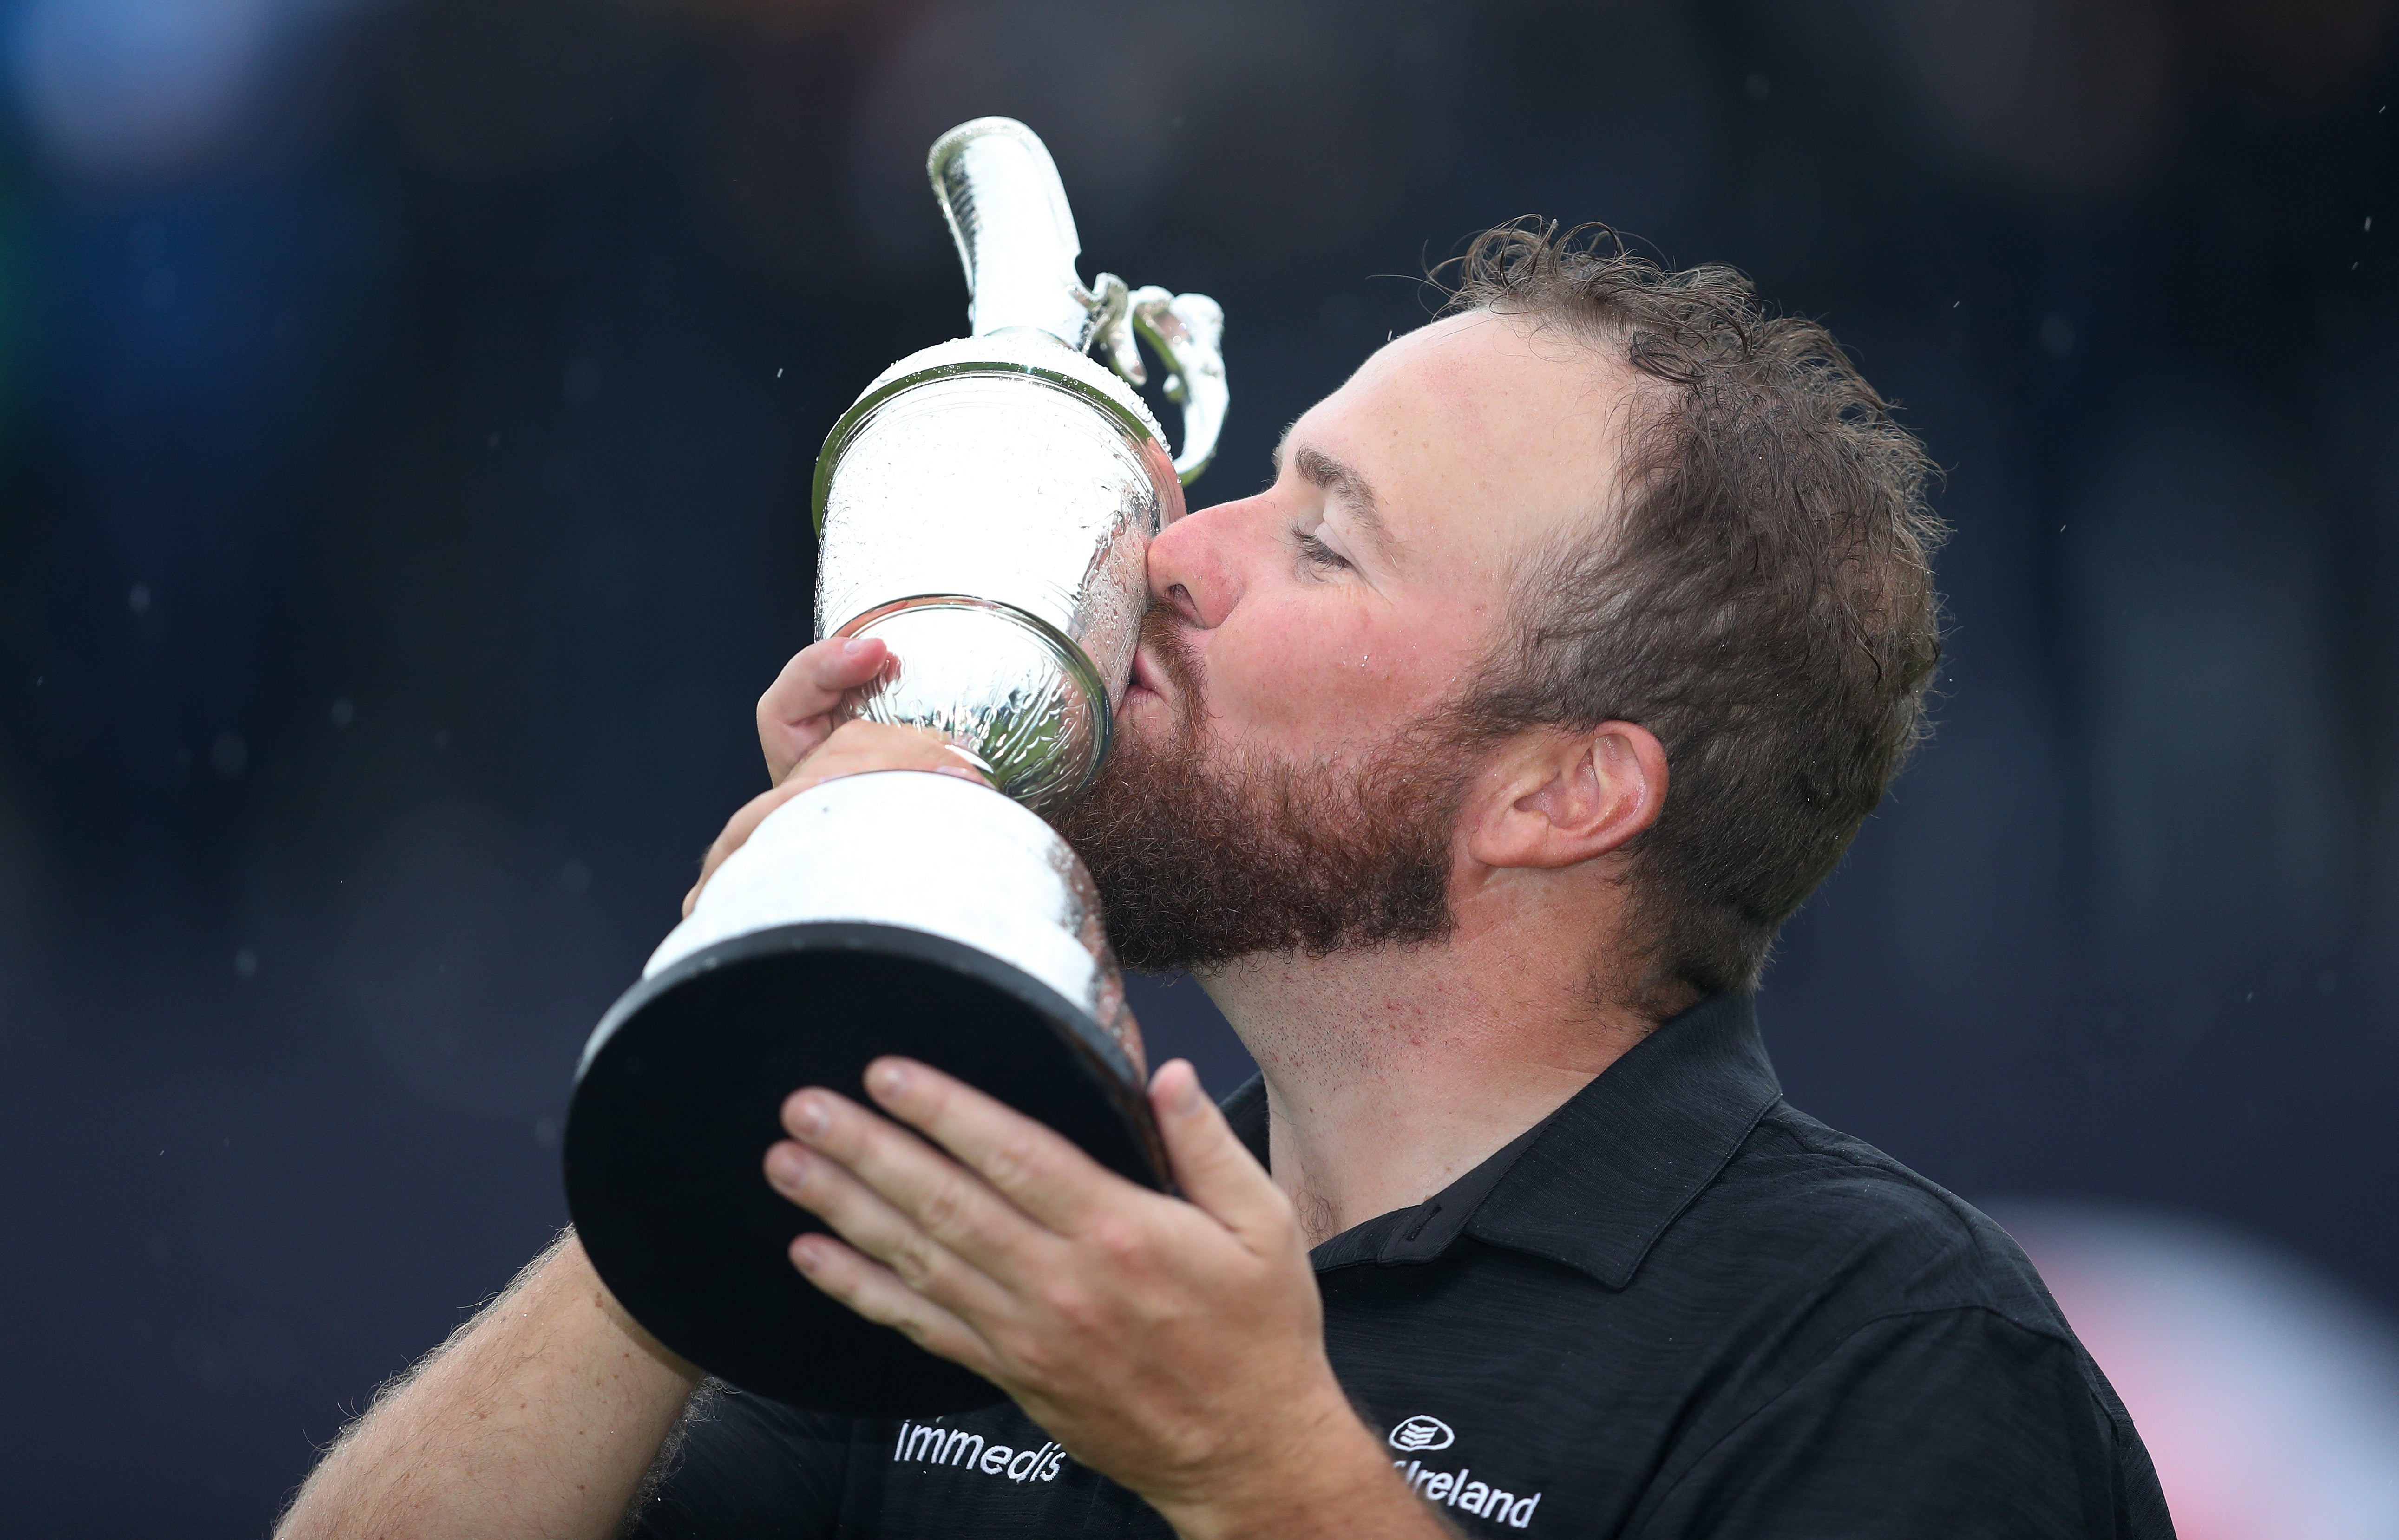 Shane Lowry celebrates with the Claret Jug after winning the 2019 Open